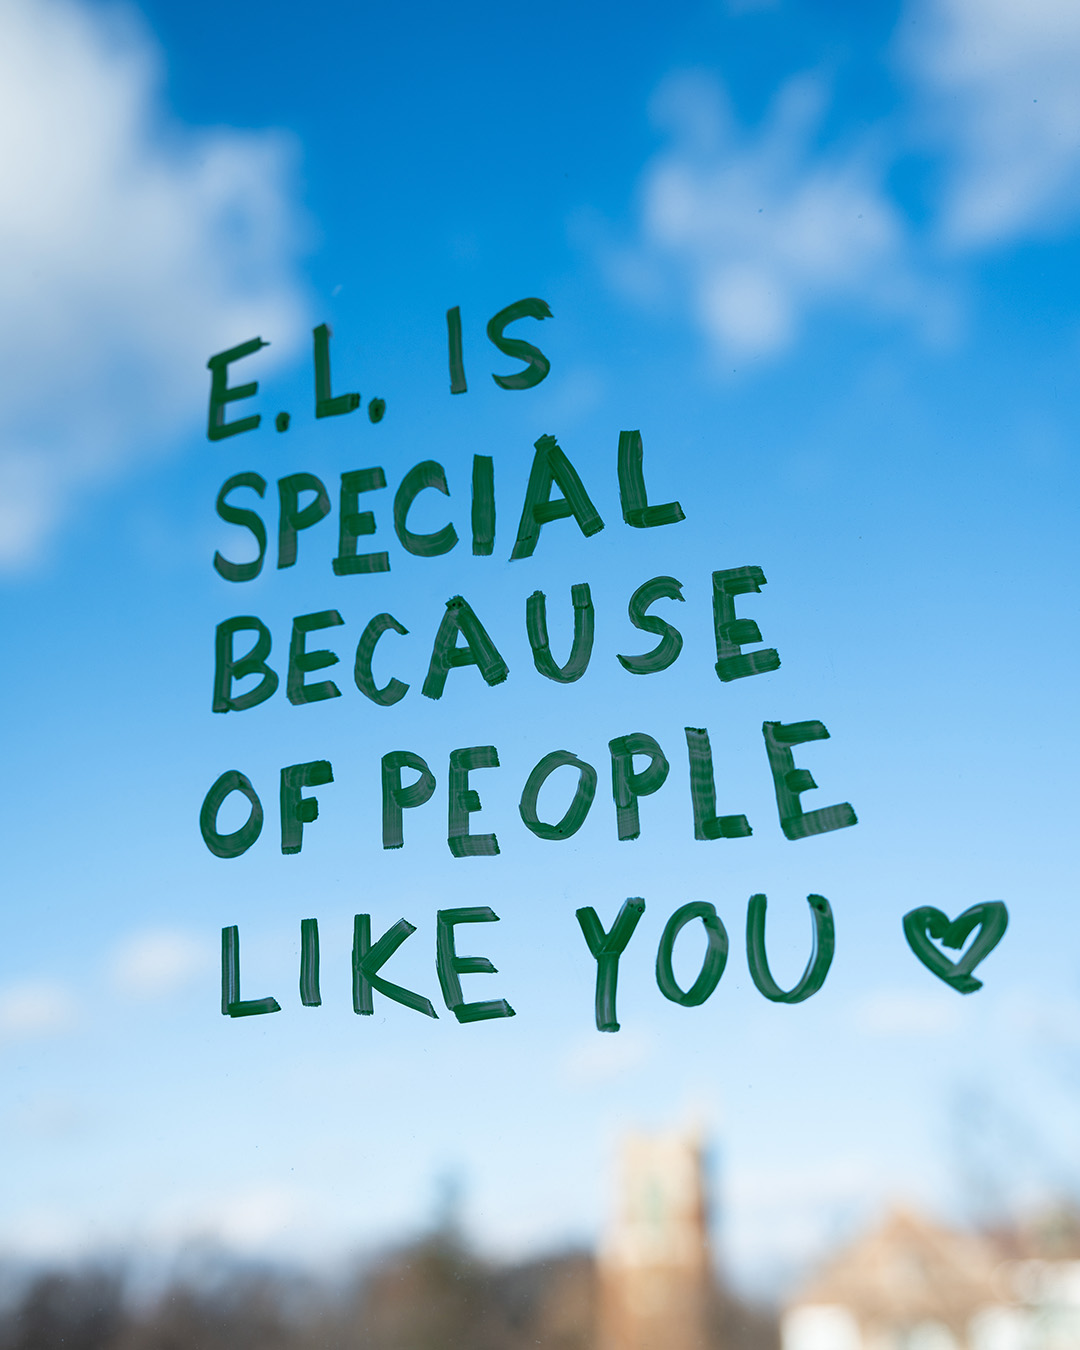 Writing on a window: EL is special because of people like you